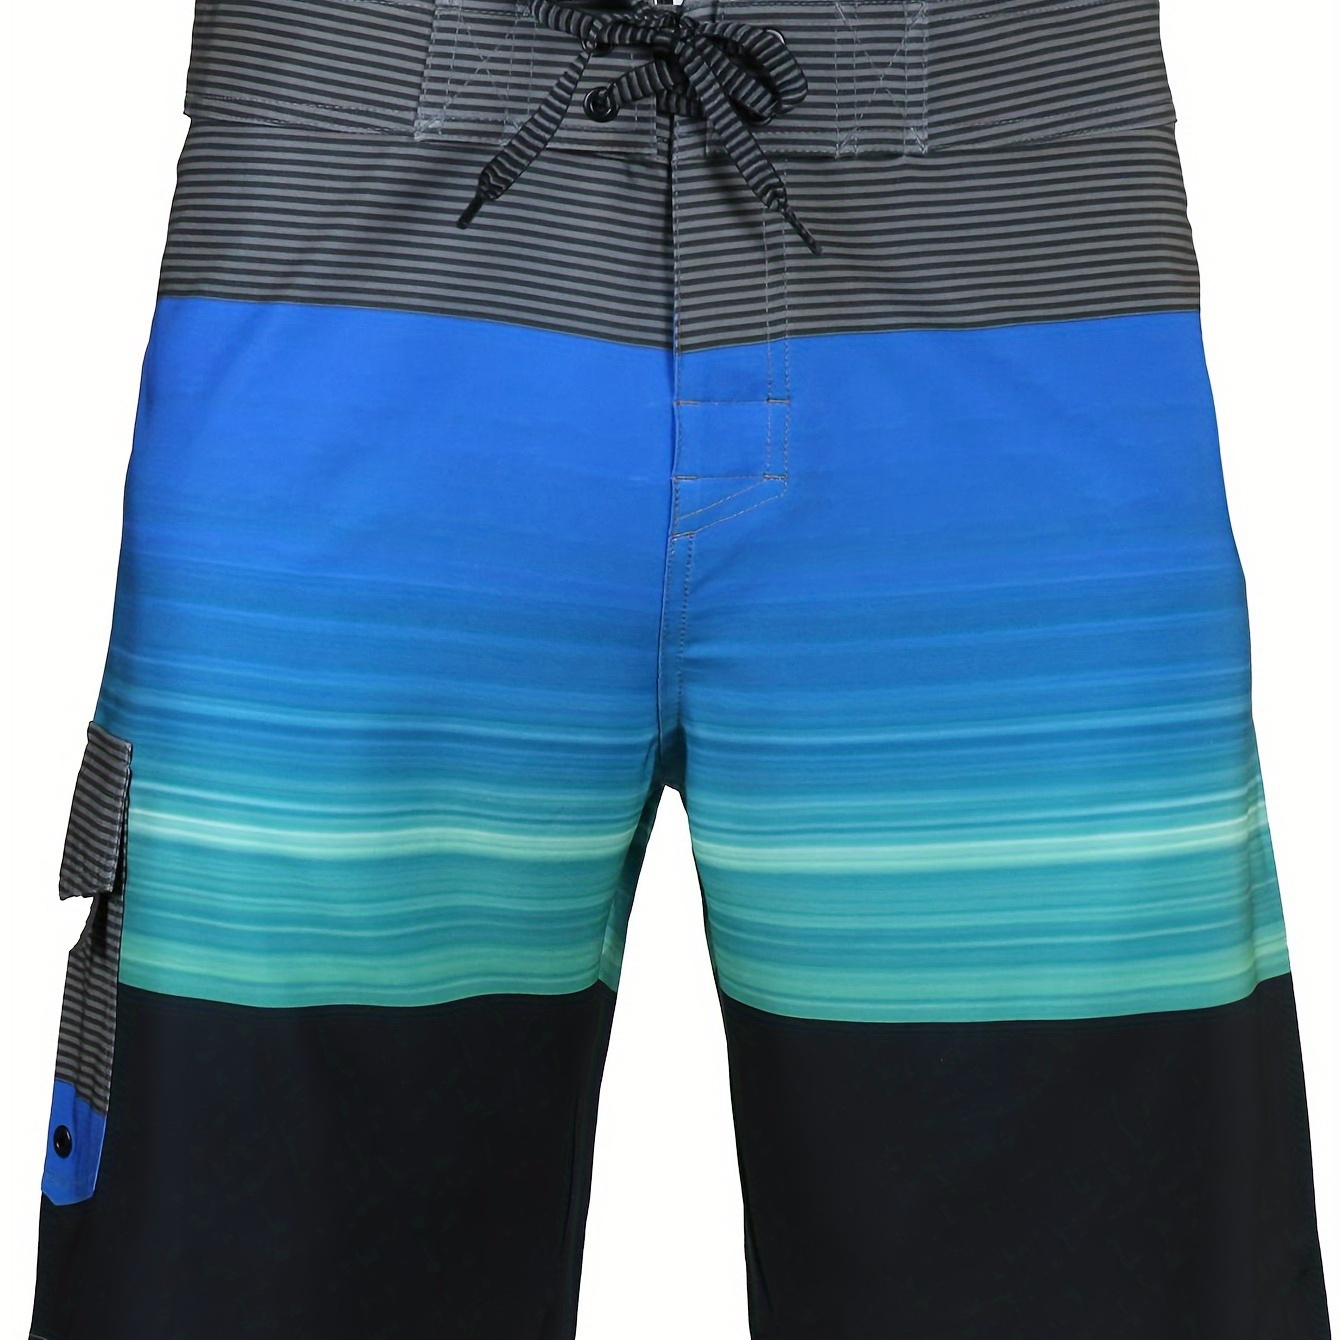 

Men's Plus Size Summer Swim Trunks With Blue Stripe Design - Comfort & Style, Quick-dry, Ideal For Pool & Beach